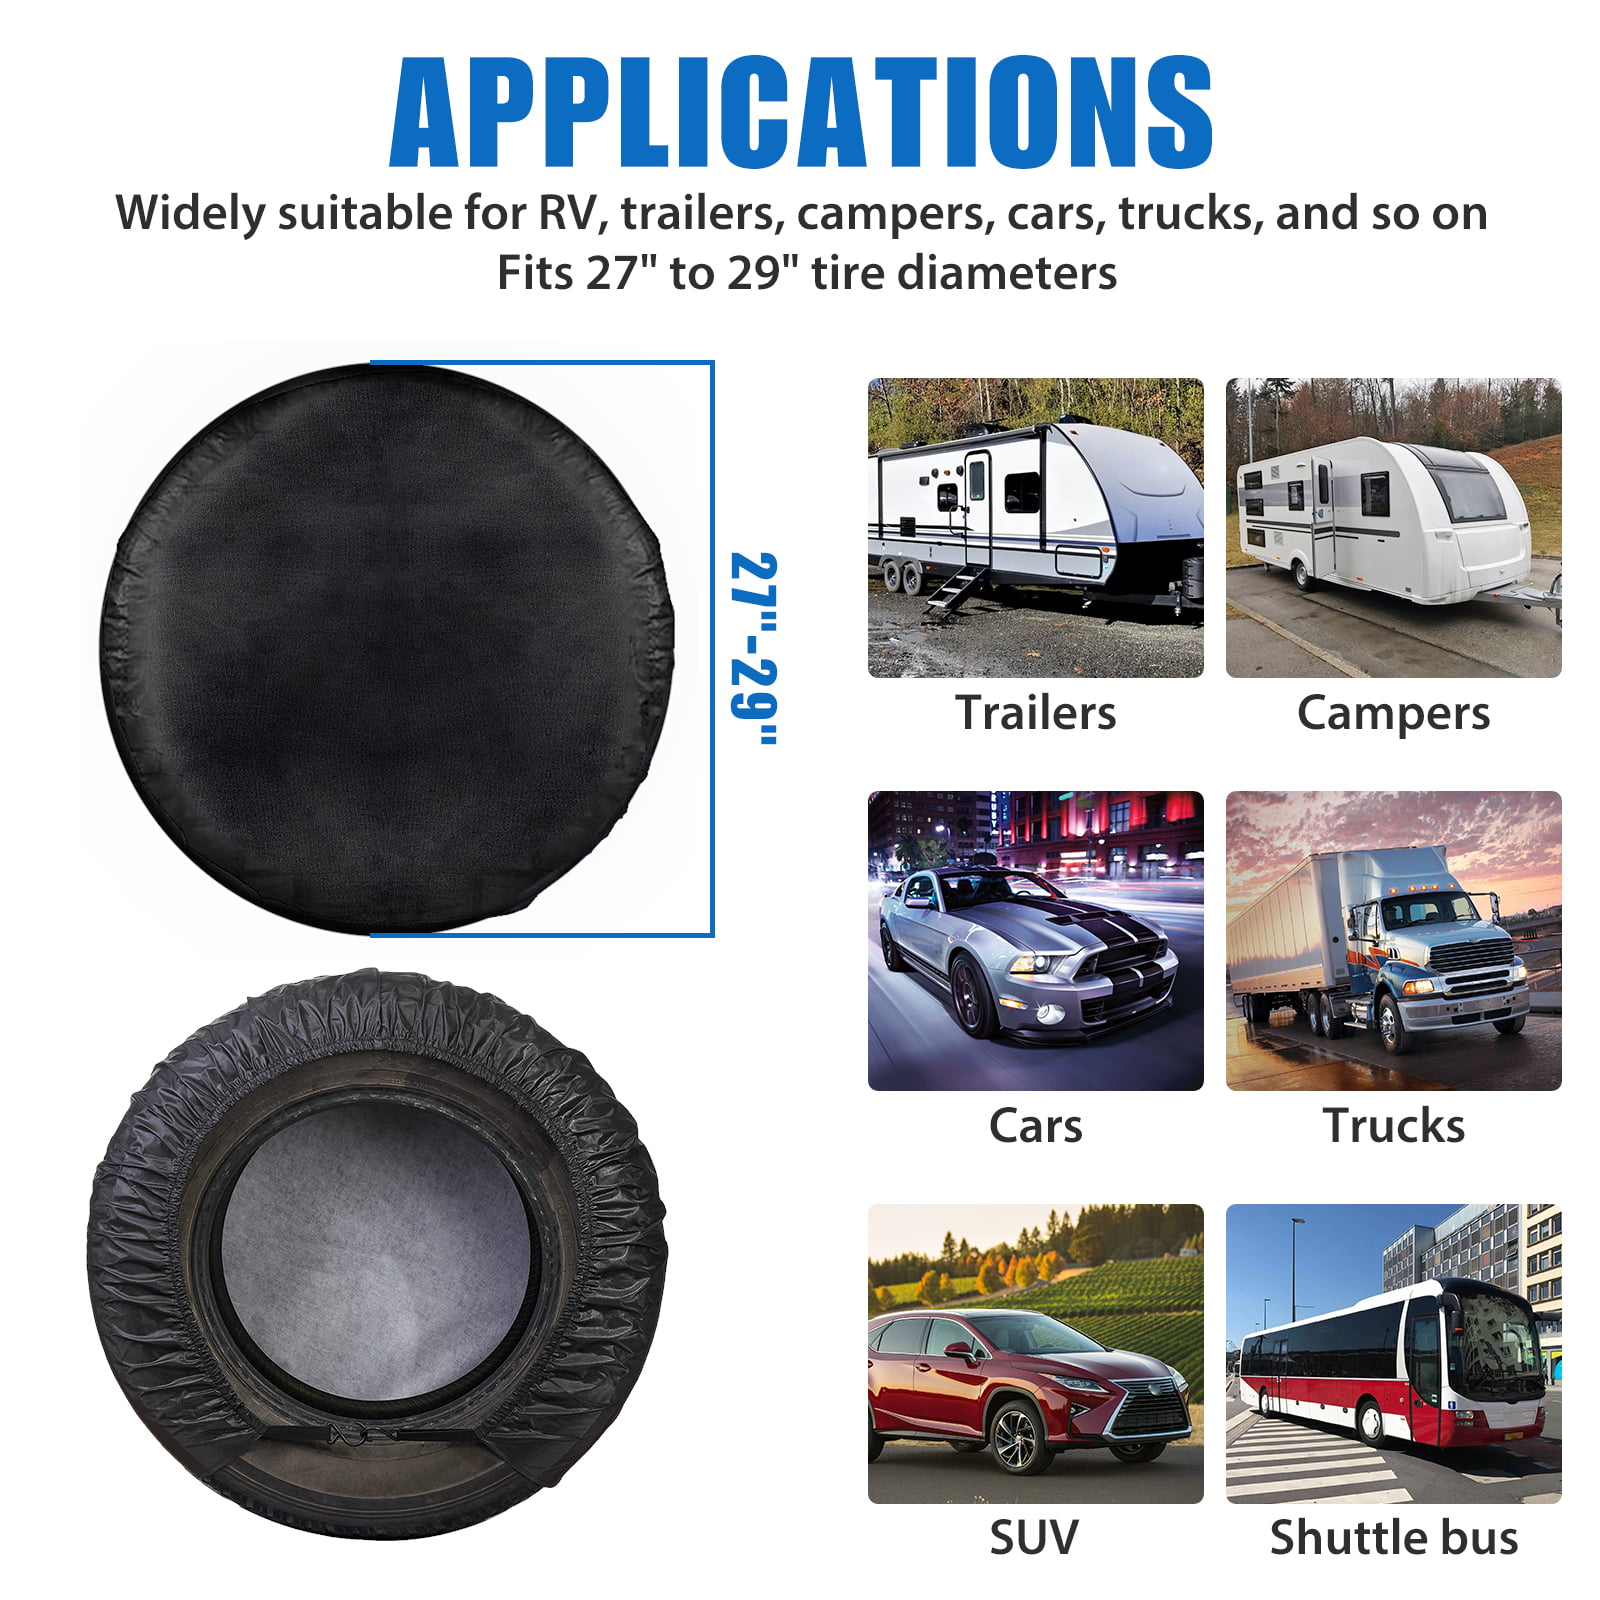 4pcs Wheel Tire Covers, EEEkit Waterproof Motorhome Wheel Covers for 27-  29inch Tire Diameters, UV Coating Tire Protectors Fit for RVs, Trailers,  Campers, Cars, and Trucks